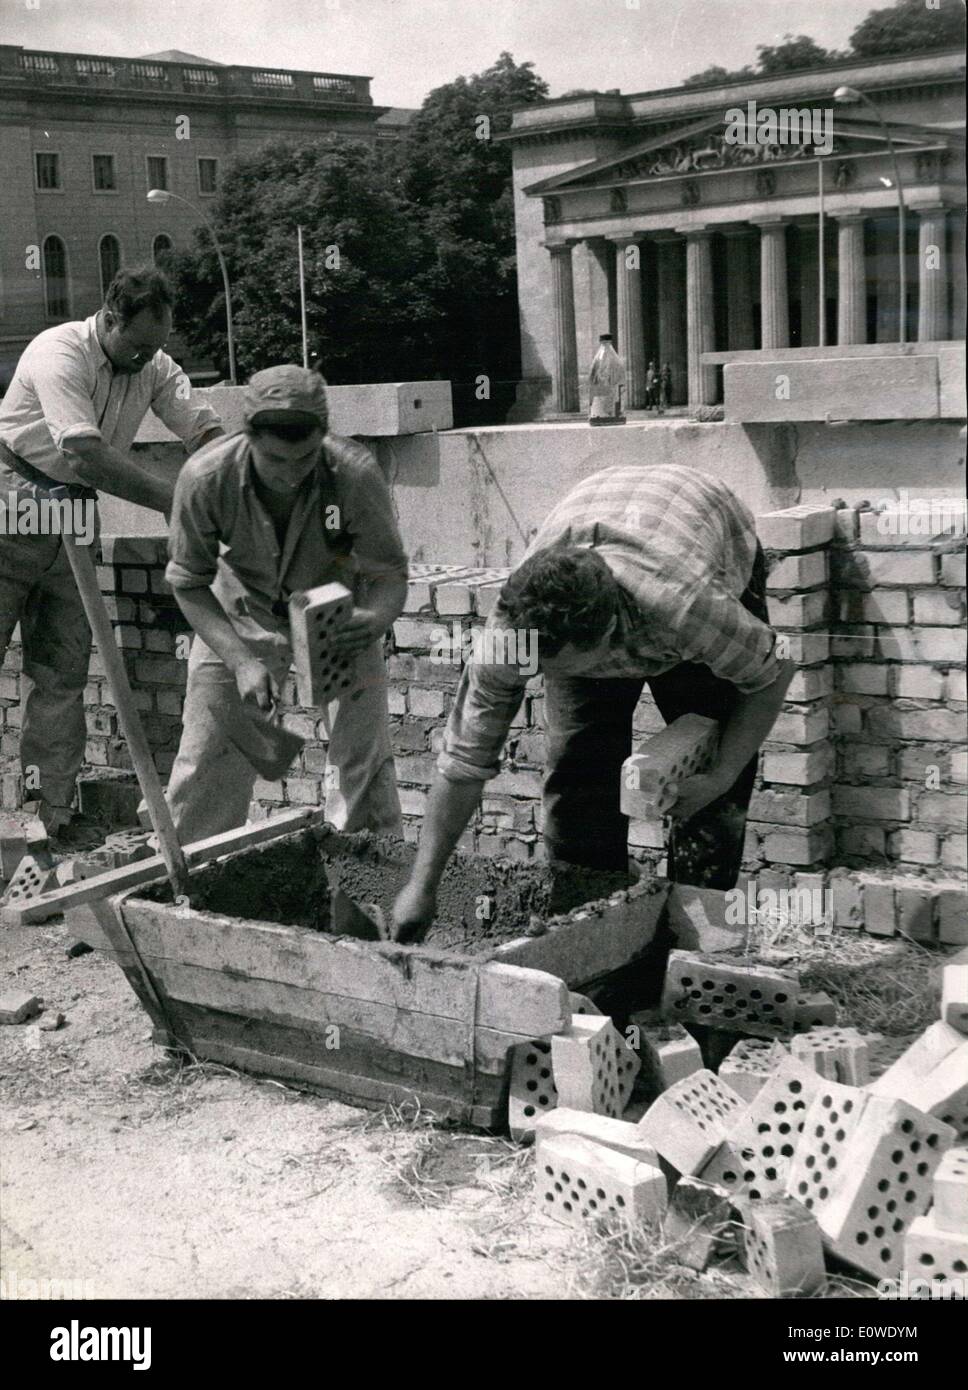 Jun. 28, 1962 - Construction work on Unter den Linden, which will take the place of the former Princess palace. The construction will mirror the old, architectural beauty found in the palace. Stock Photo